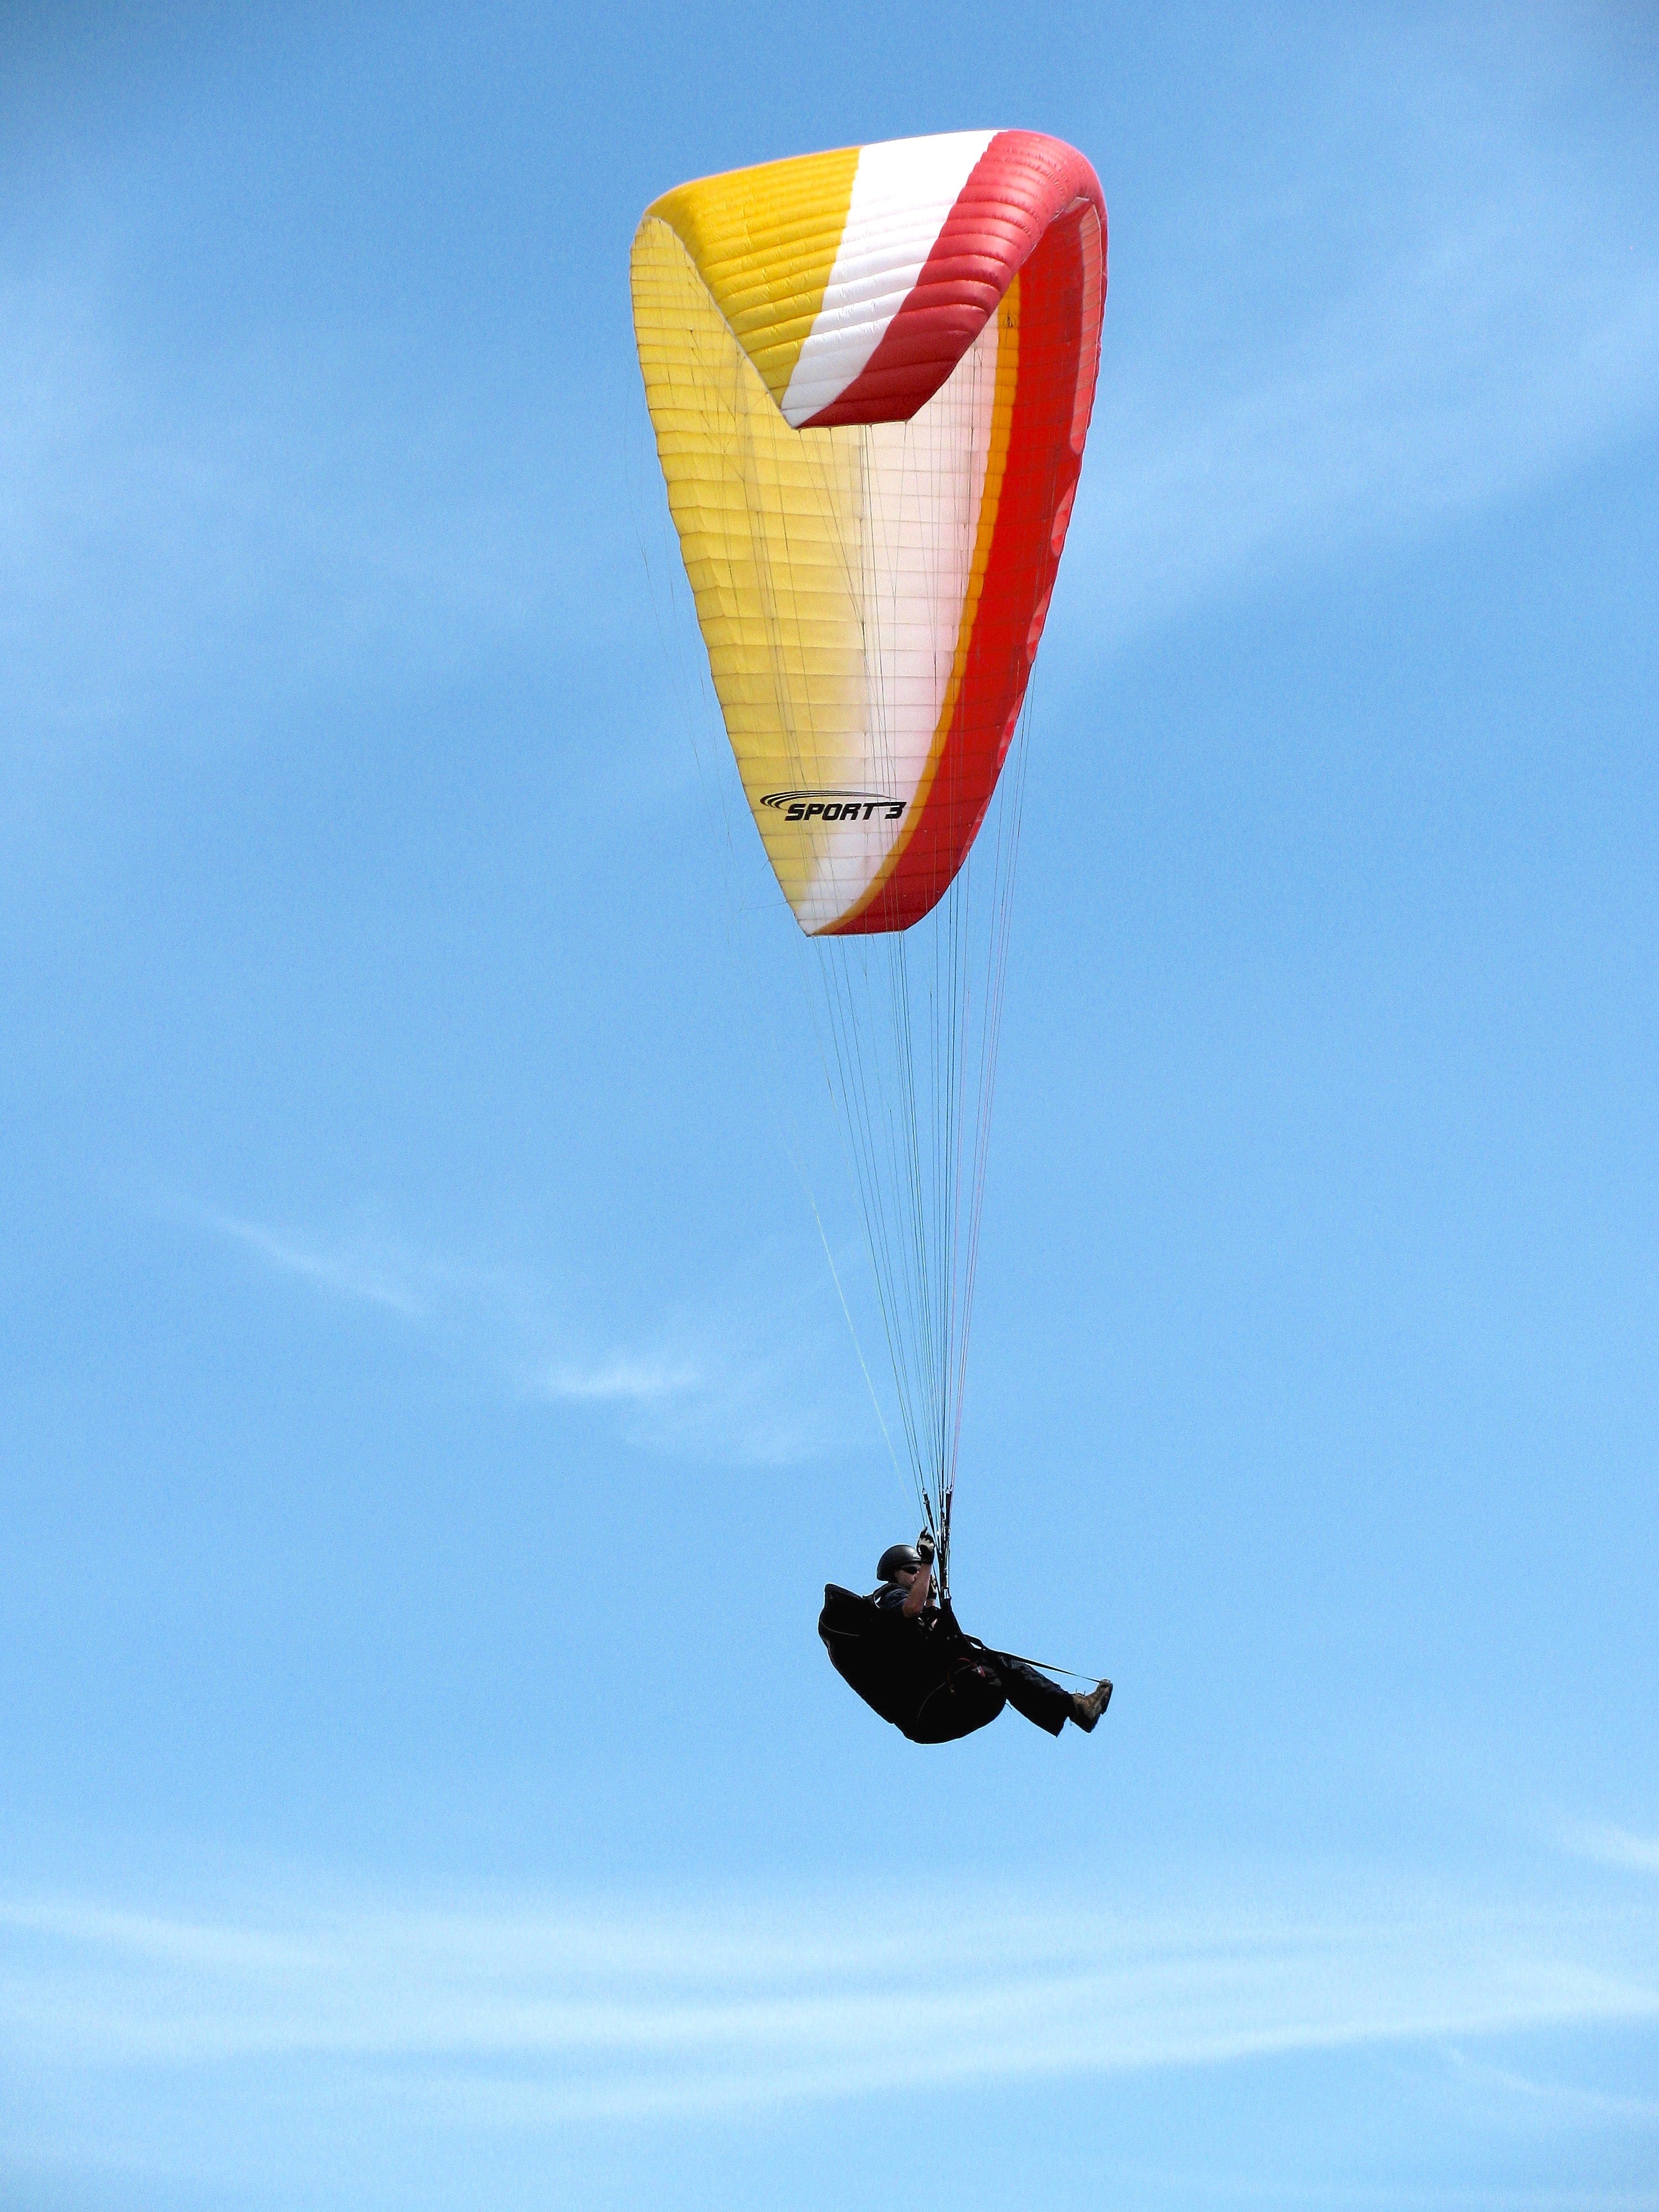 Gliding, Fly, Flying, Hang Glider, Sky, mid-air, flying